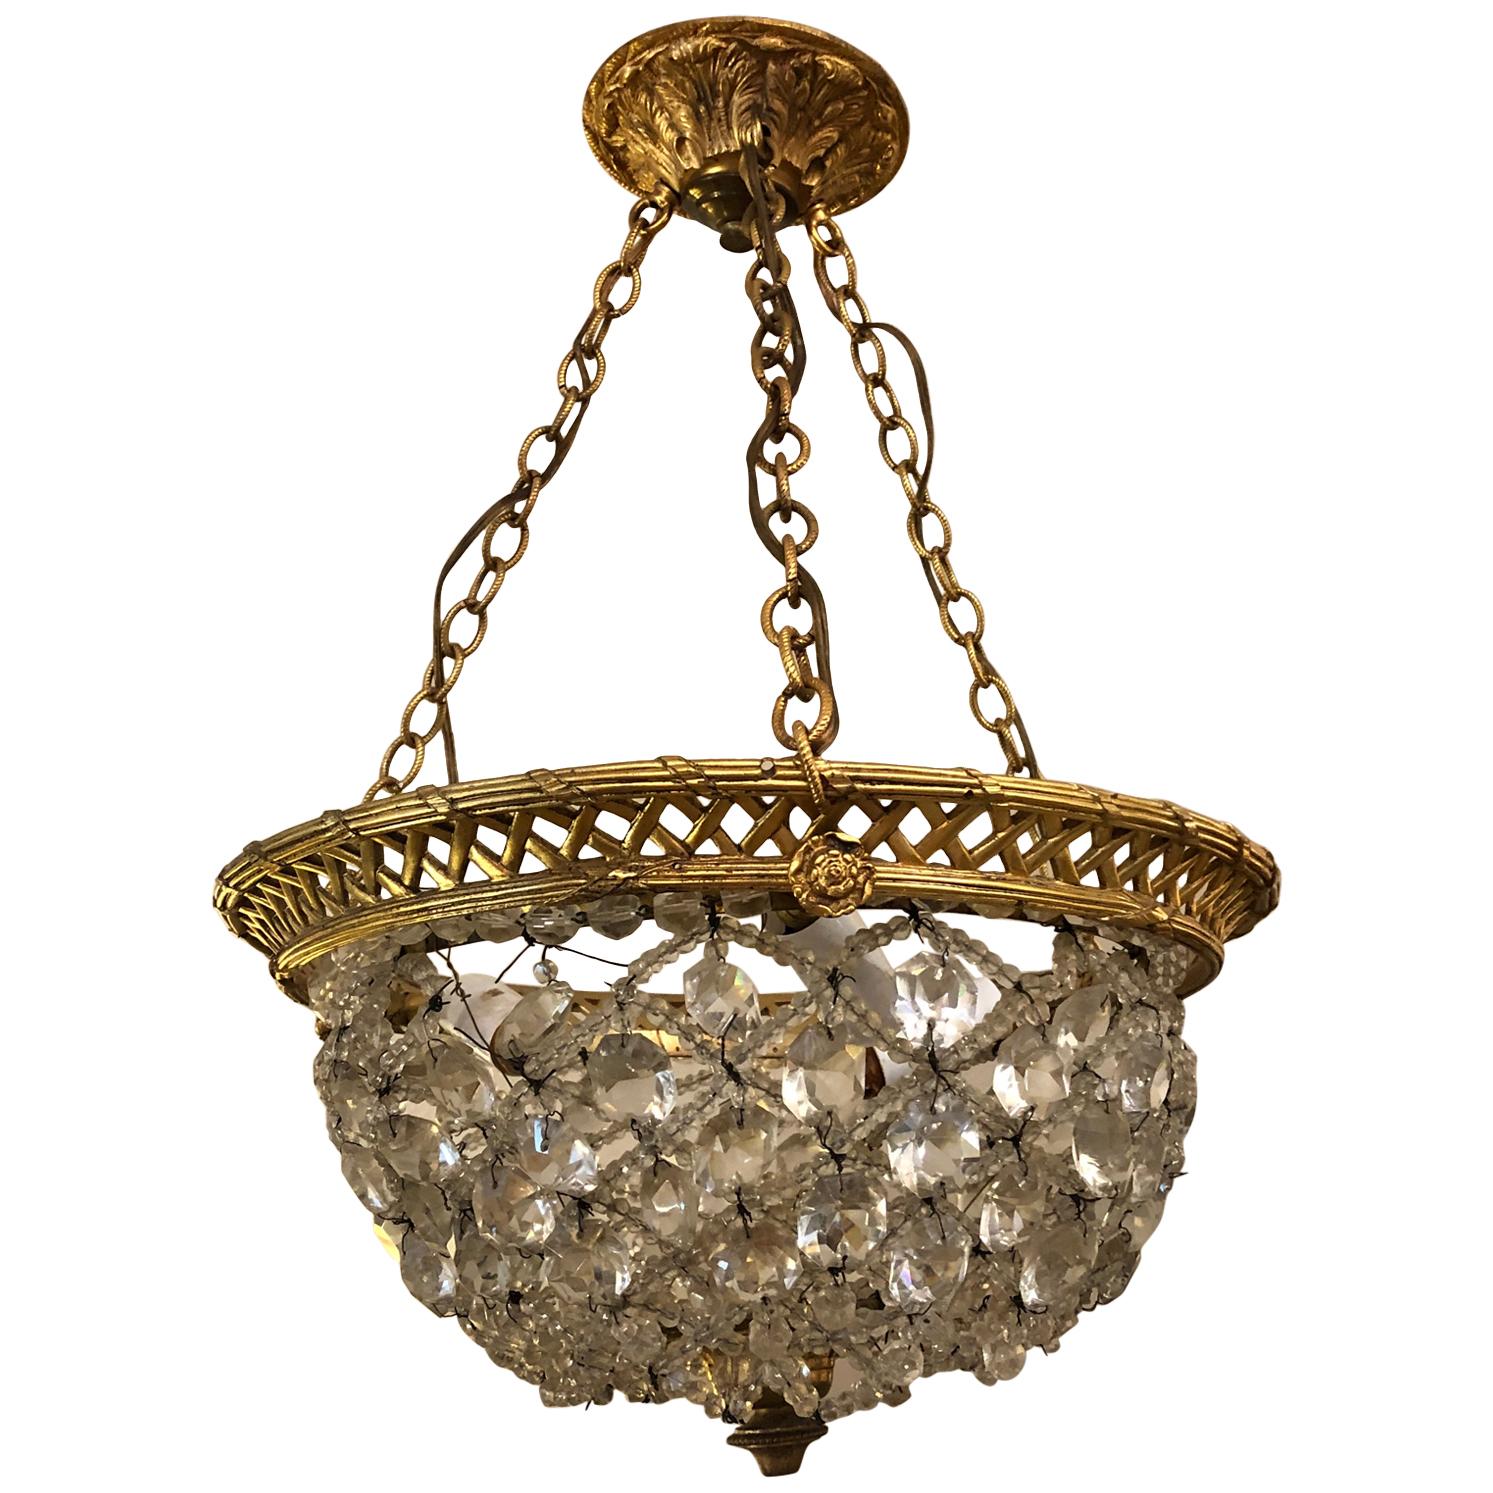 Romantic Crystal Encrusted Small Dome-Shaped Chandelier